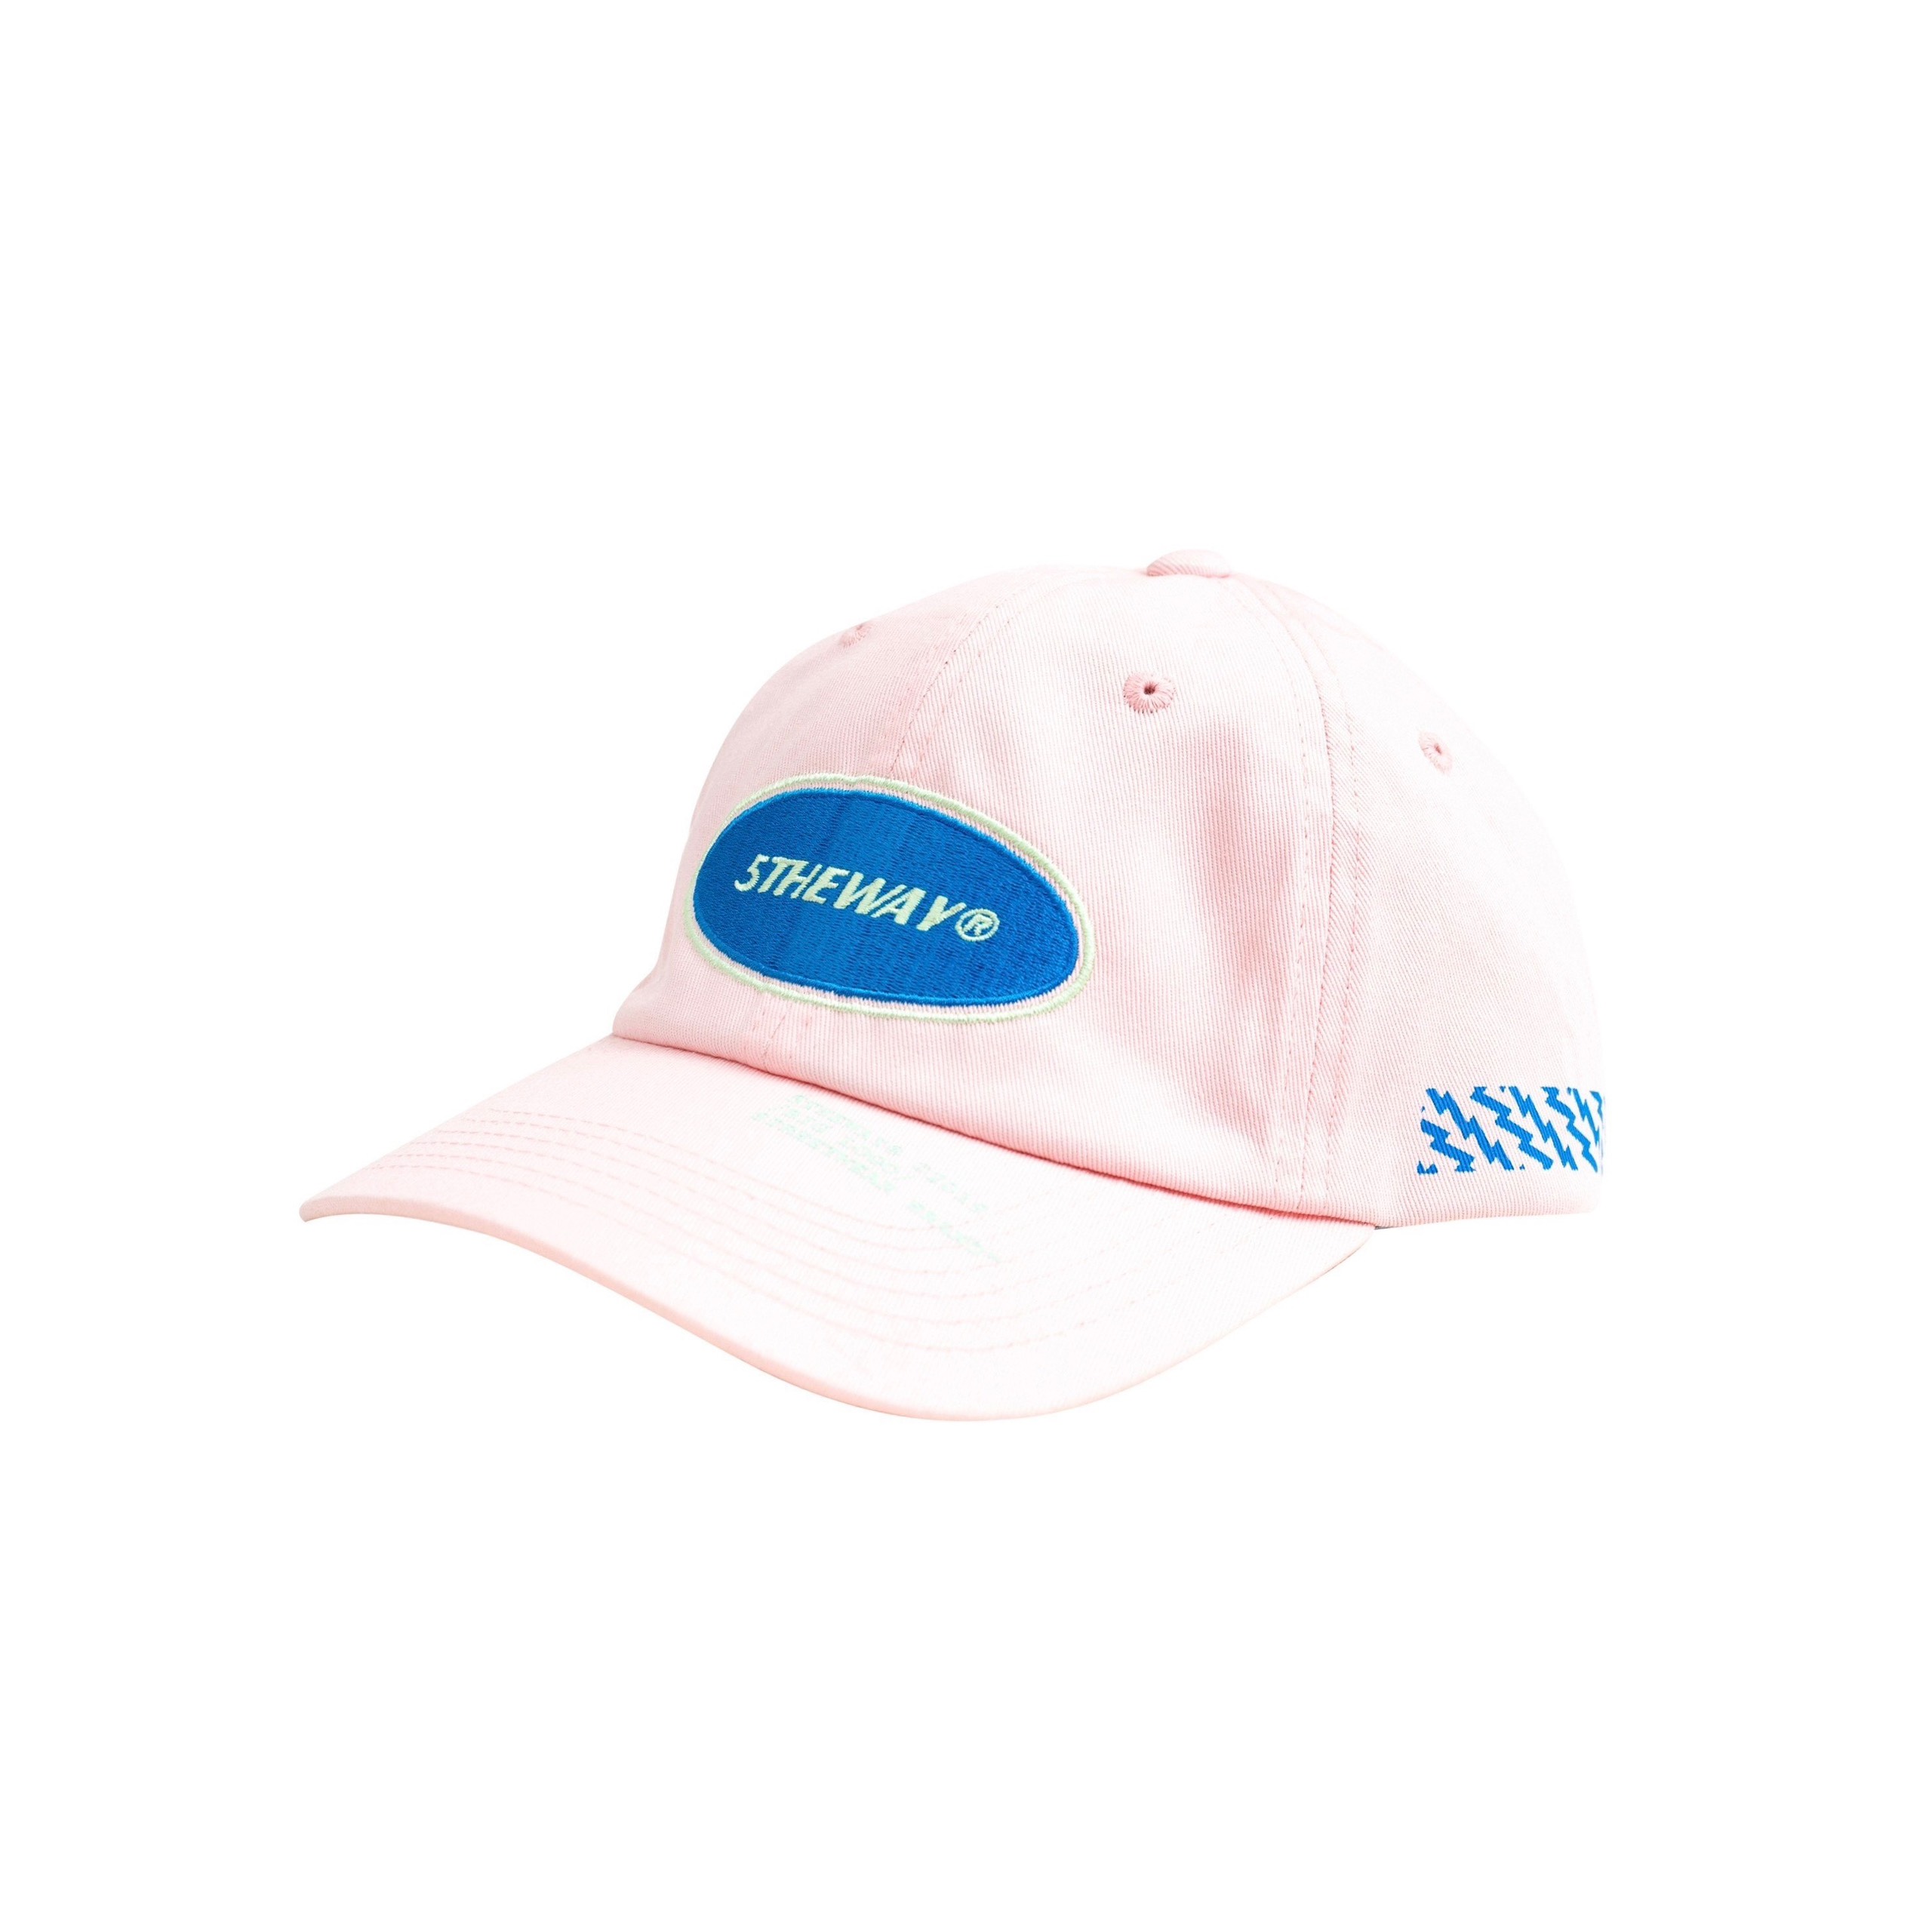 Nón Lưỡi Trai 5THEWAY Hồng aka 5THEWAY /oval/ Unstructure Washed Dad Cap in CRYSTAL ROSE